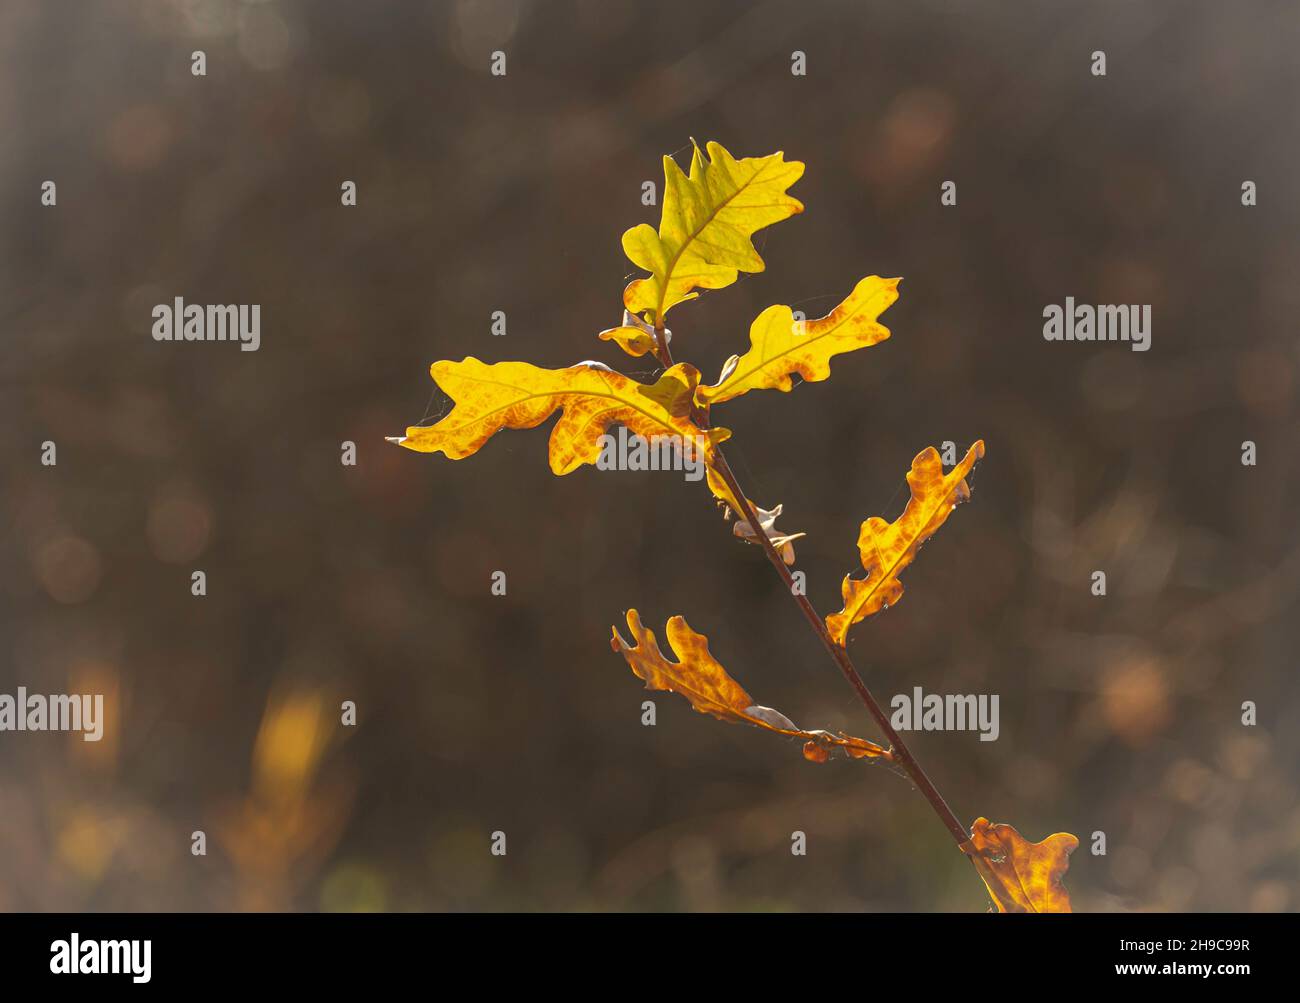 Oak branch with yellow leaves illuminated by sunlight on a clear autumn day Stock Photo